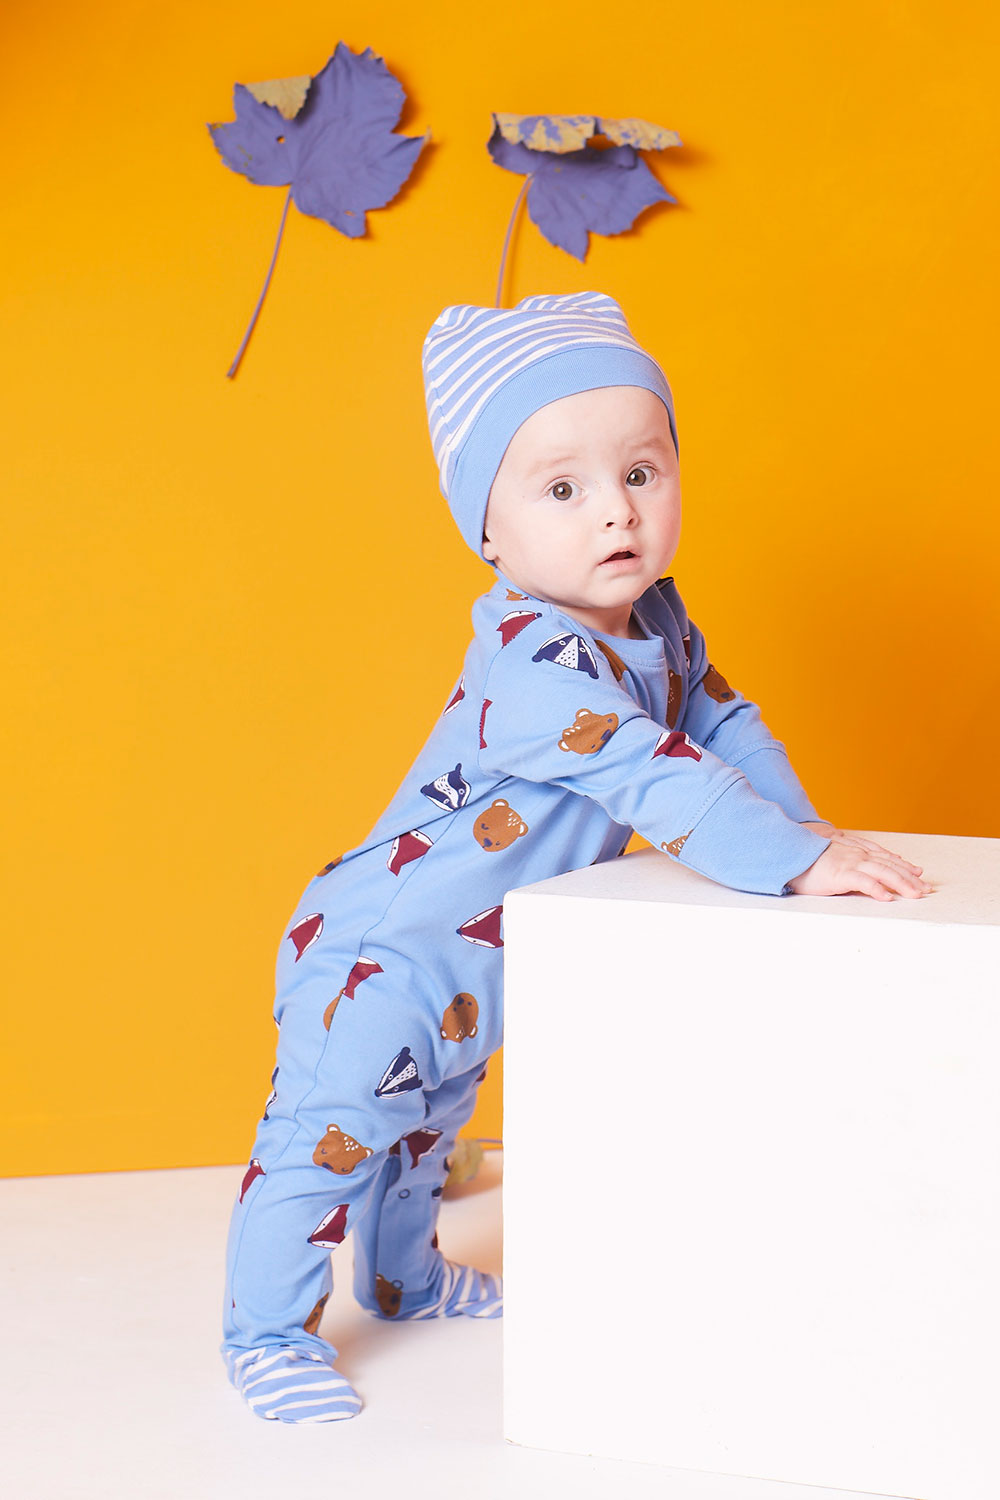 A young boy stood up wearing a blue baby grow by Lilly + Sid